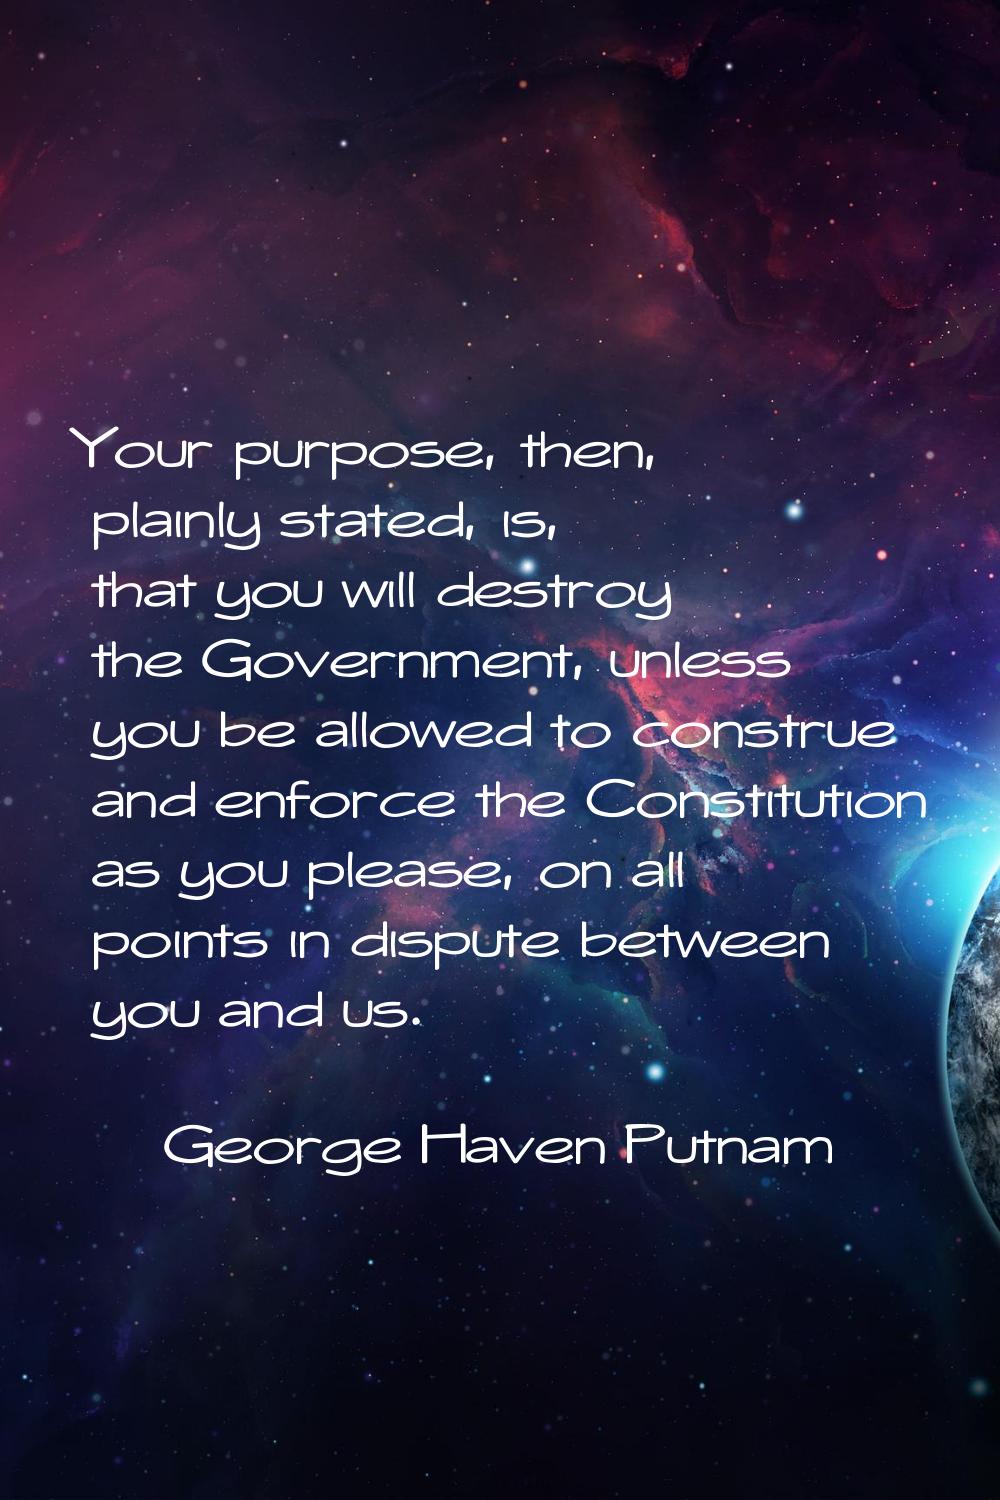 Your purpose, then, plainly stated, is, that you will destroy the Government, unless you be allowed